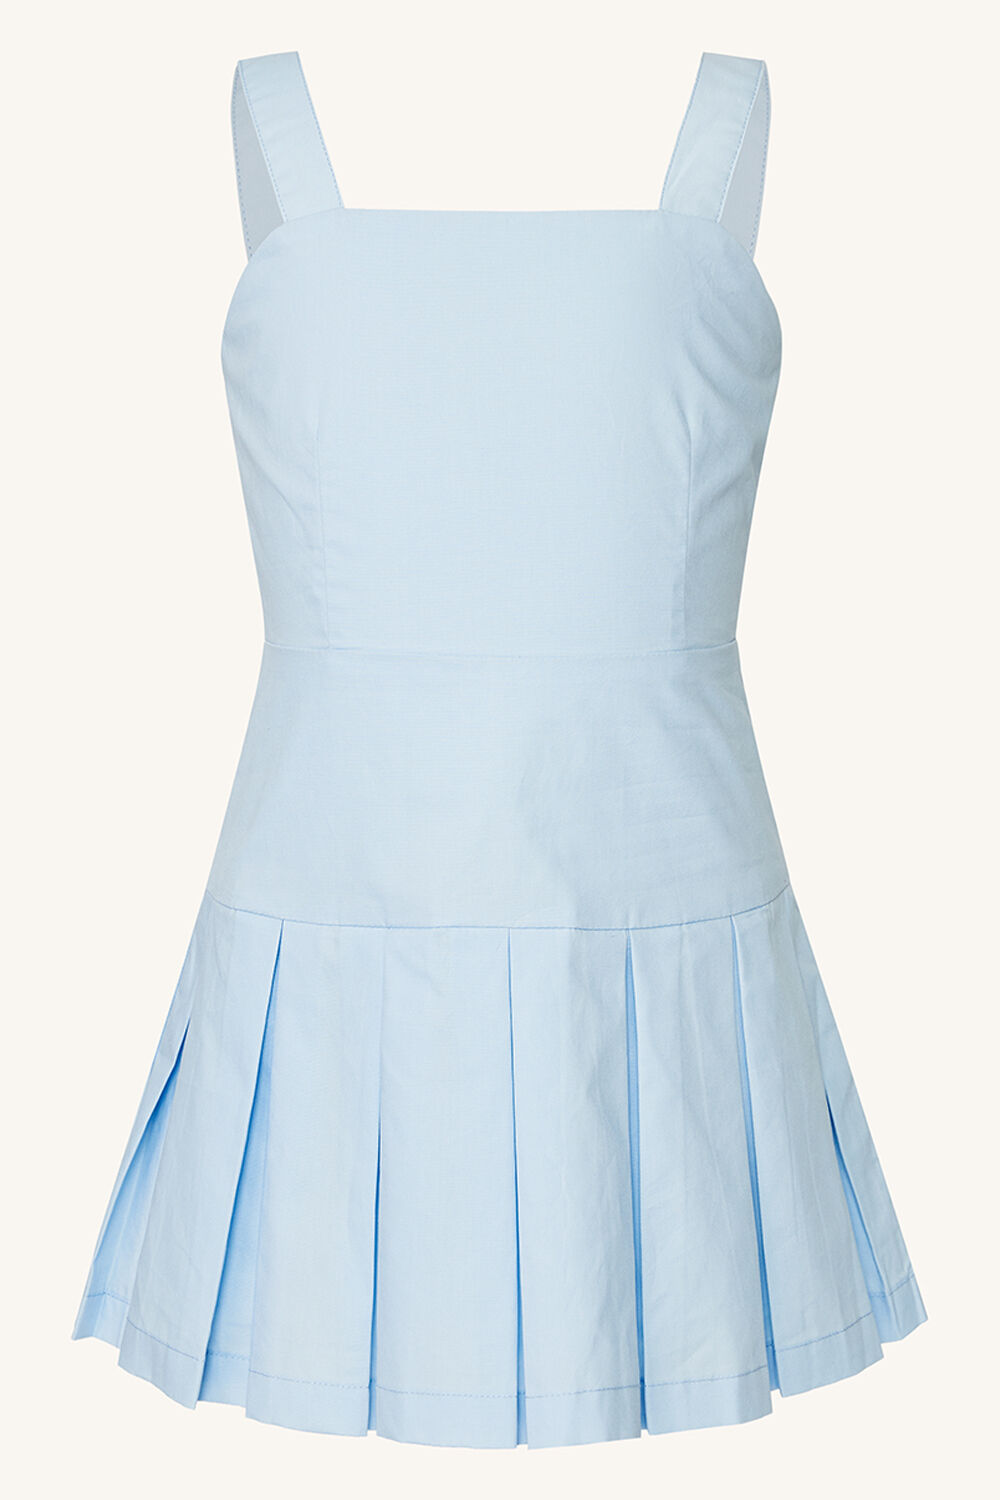 TILLY PLEAT DRESS in colour BABY BLUE